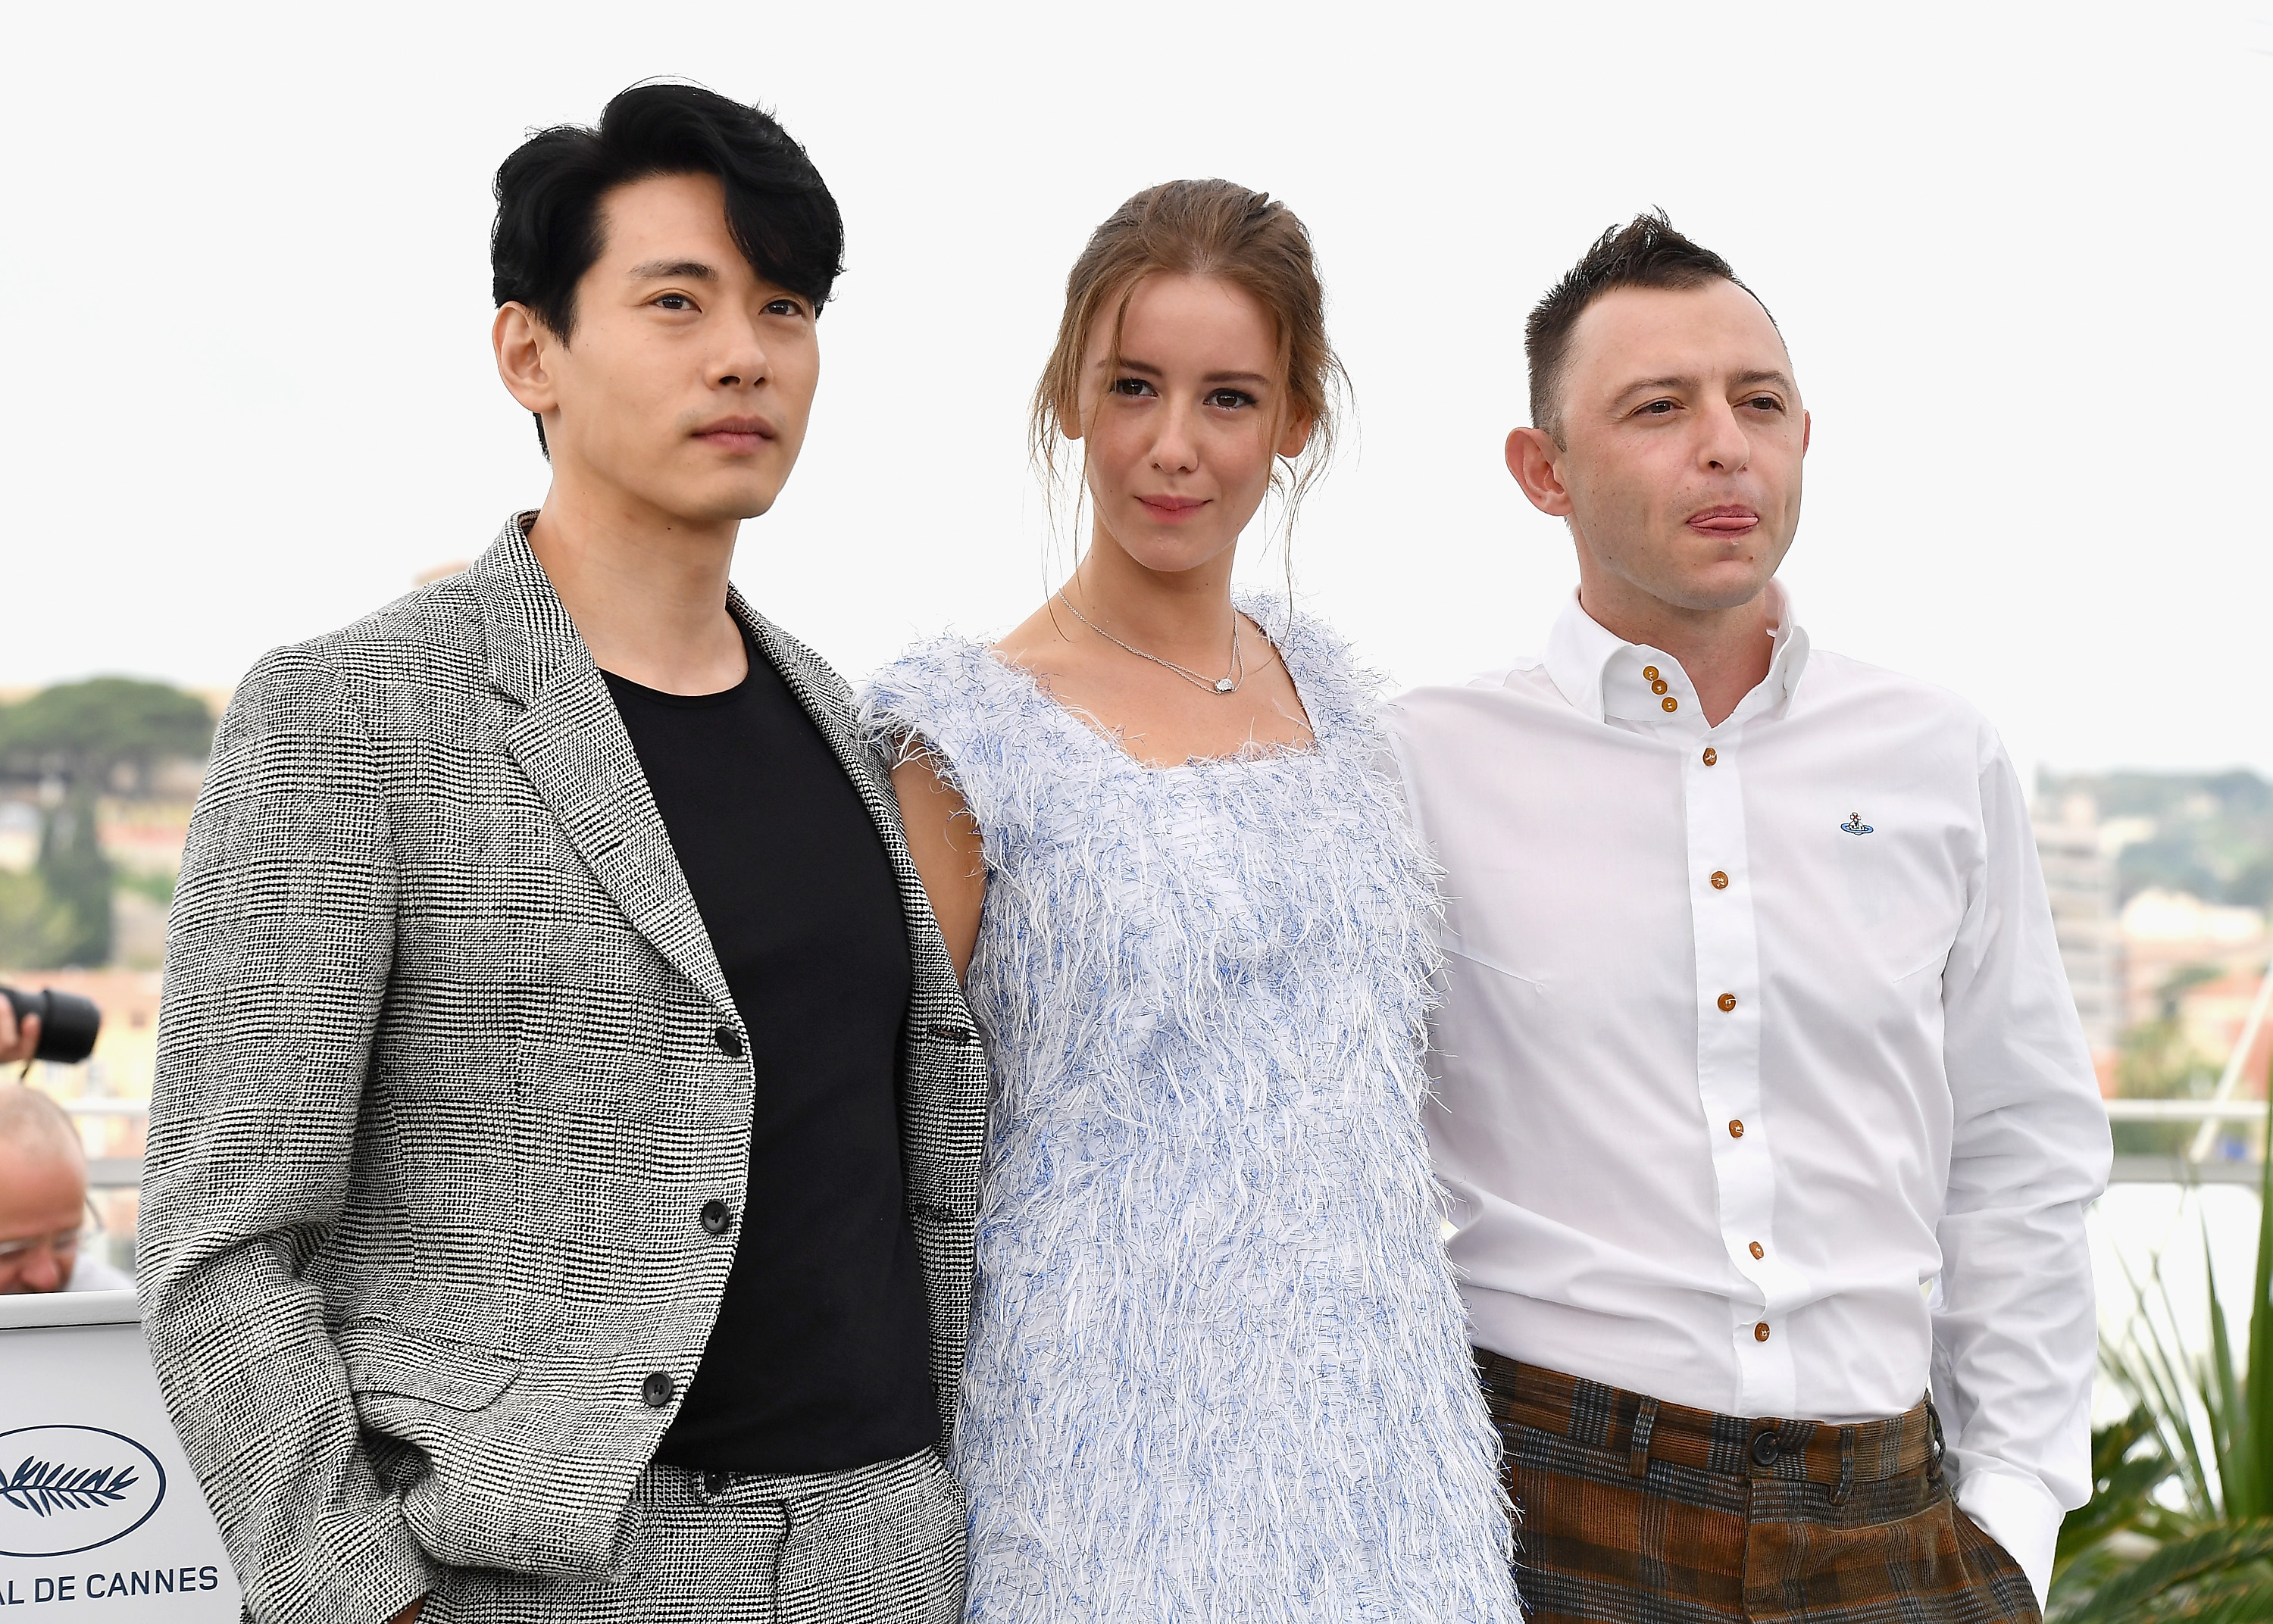 Teo Yoo, Irina Starshenbaum and Roma Zver attend the photocall for "Leto"  during the 71st annual Cannes Film Festival on May 10, 2018 in Cannes, France. (Dominique Charriau&mdash;WireImage/Getty Images)